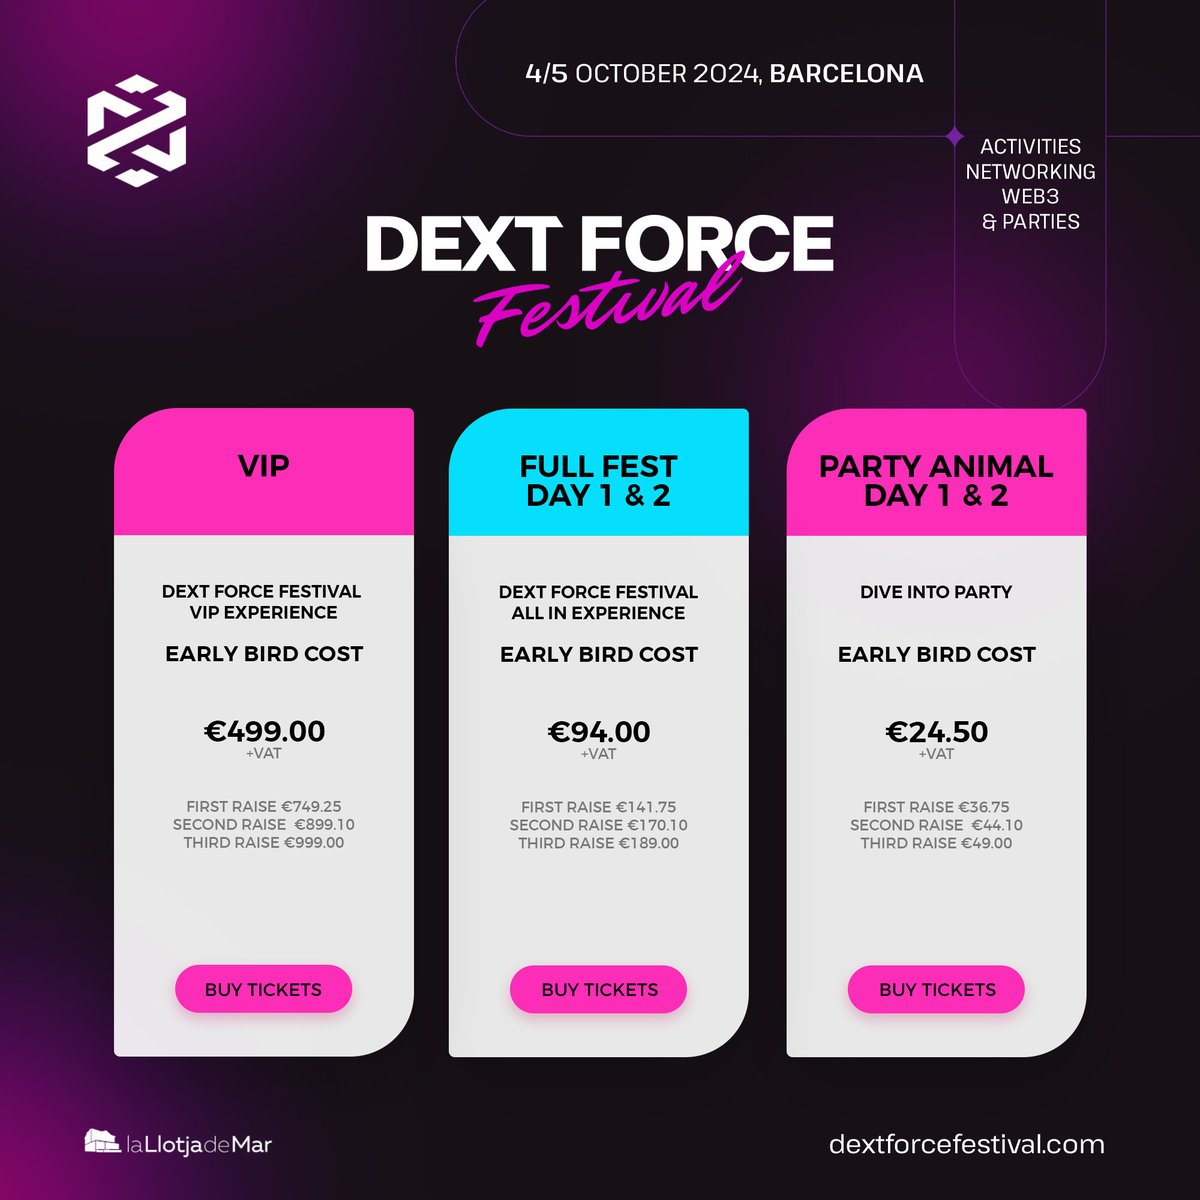 Buy your tickets NOW with a 50% discount 🚀
Find details and more options on our website 💯

dextforcefestival.com

#DextForceFestival #Web3Festival #Barcelona2024 #DextForceFestival2024